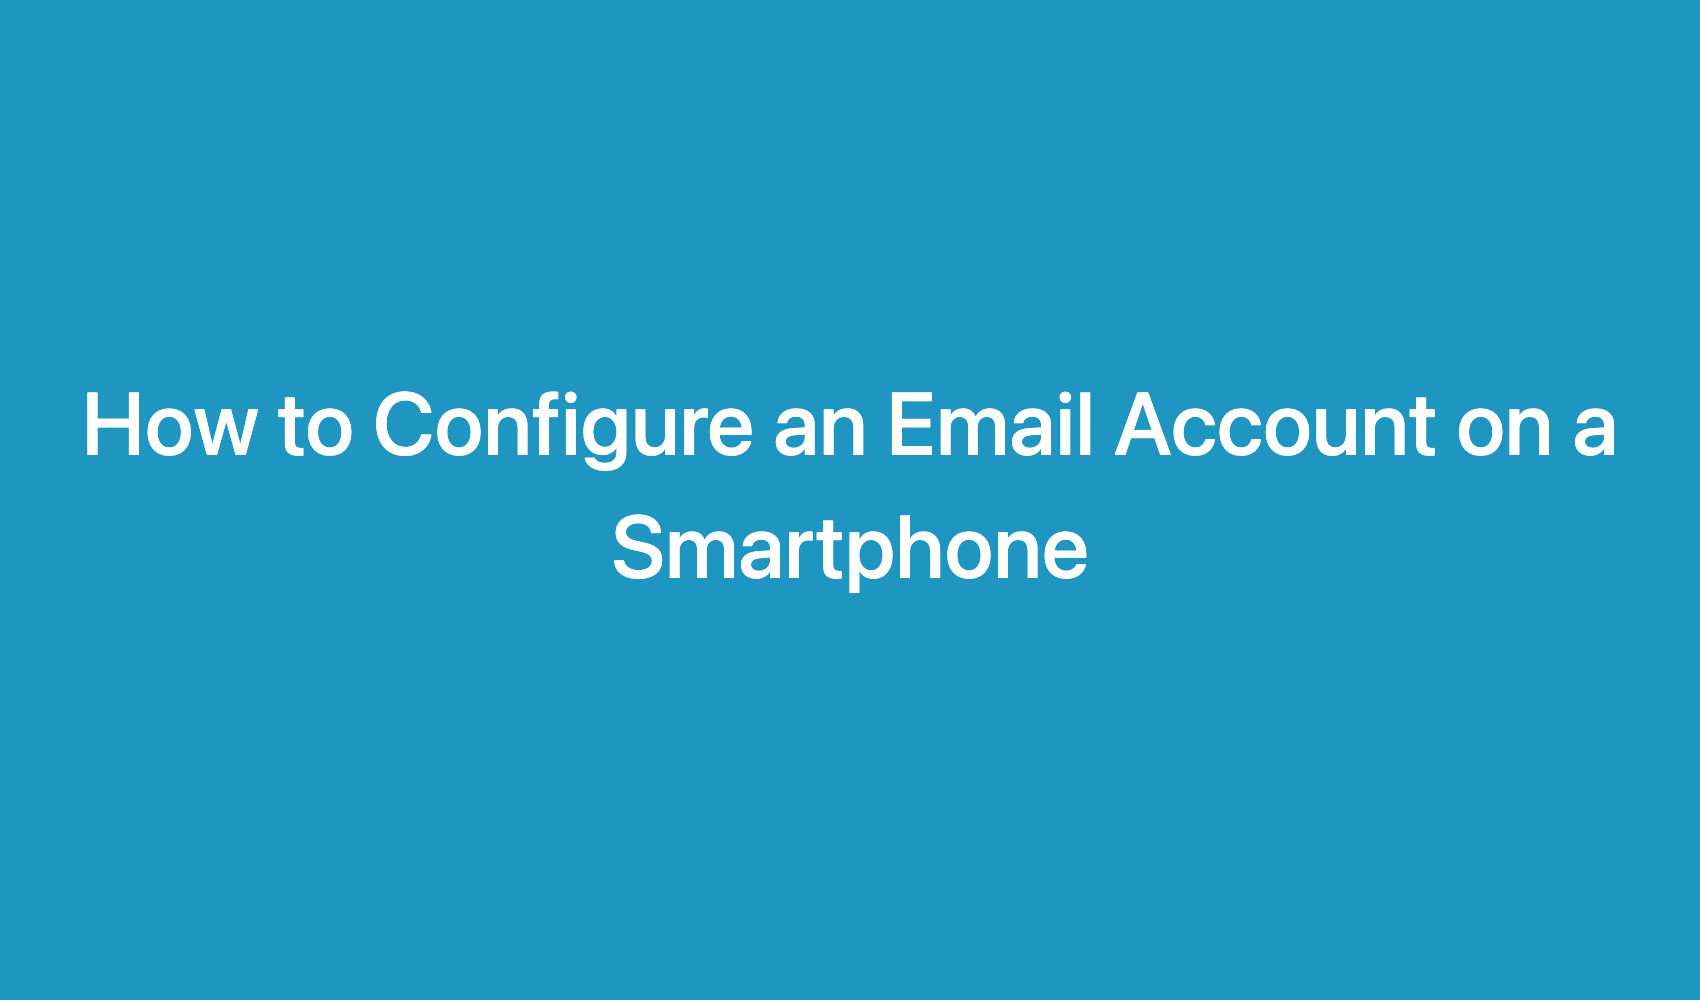 How To Configure An Email Account On A Smartphone